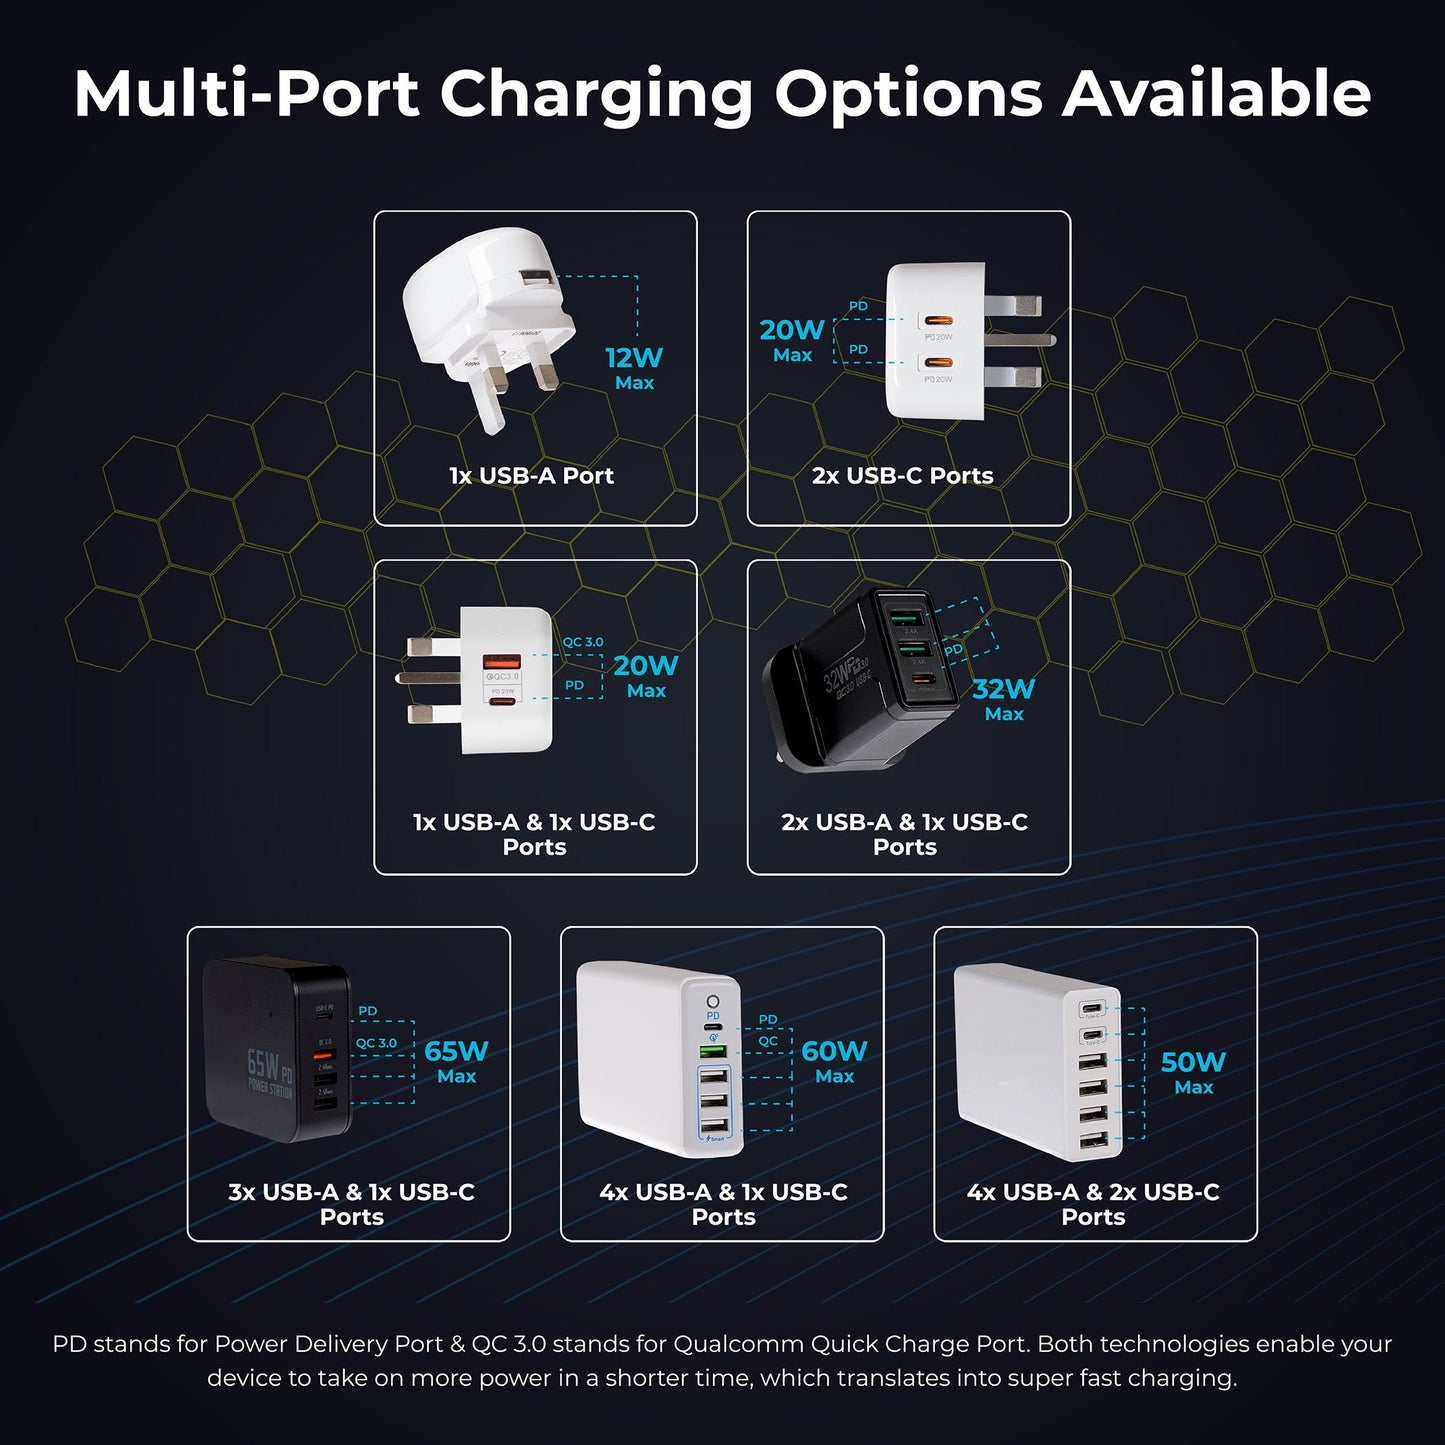 Maplin 3 Port (1x USB-C PD / 2x USB-A 3.0 QC) 32W High Speed Wall Charger - maplin.co.uk